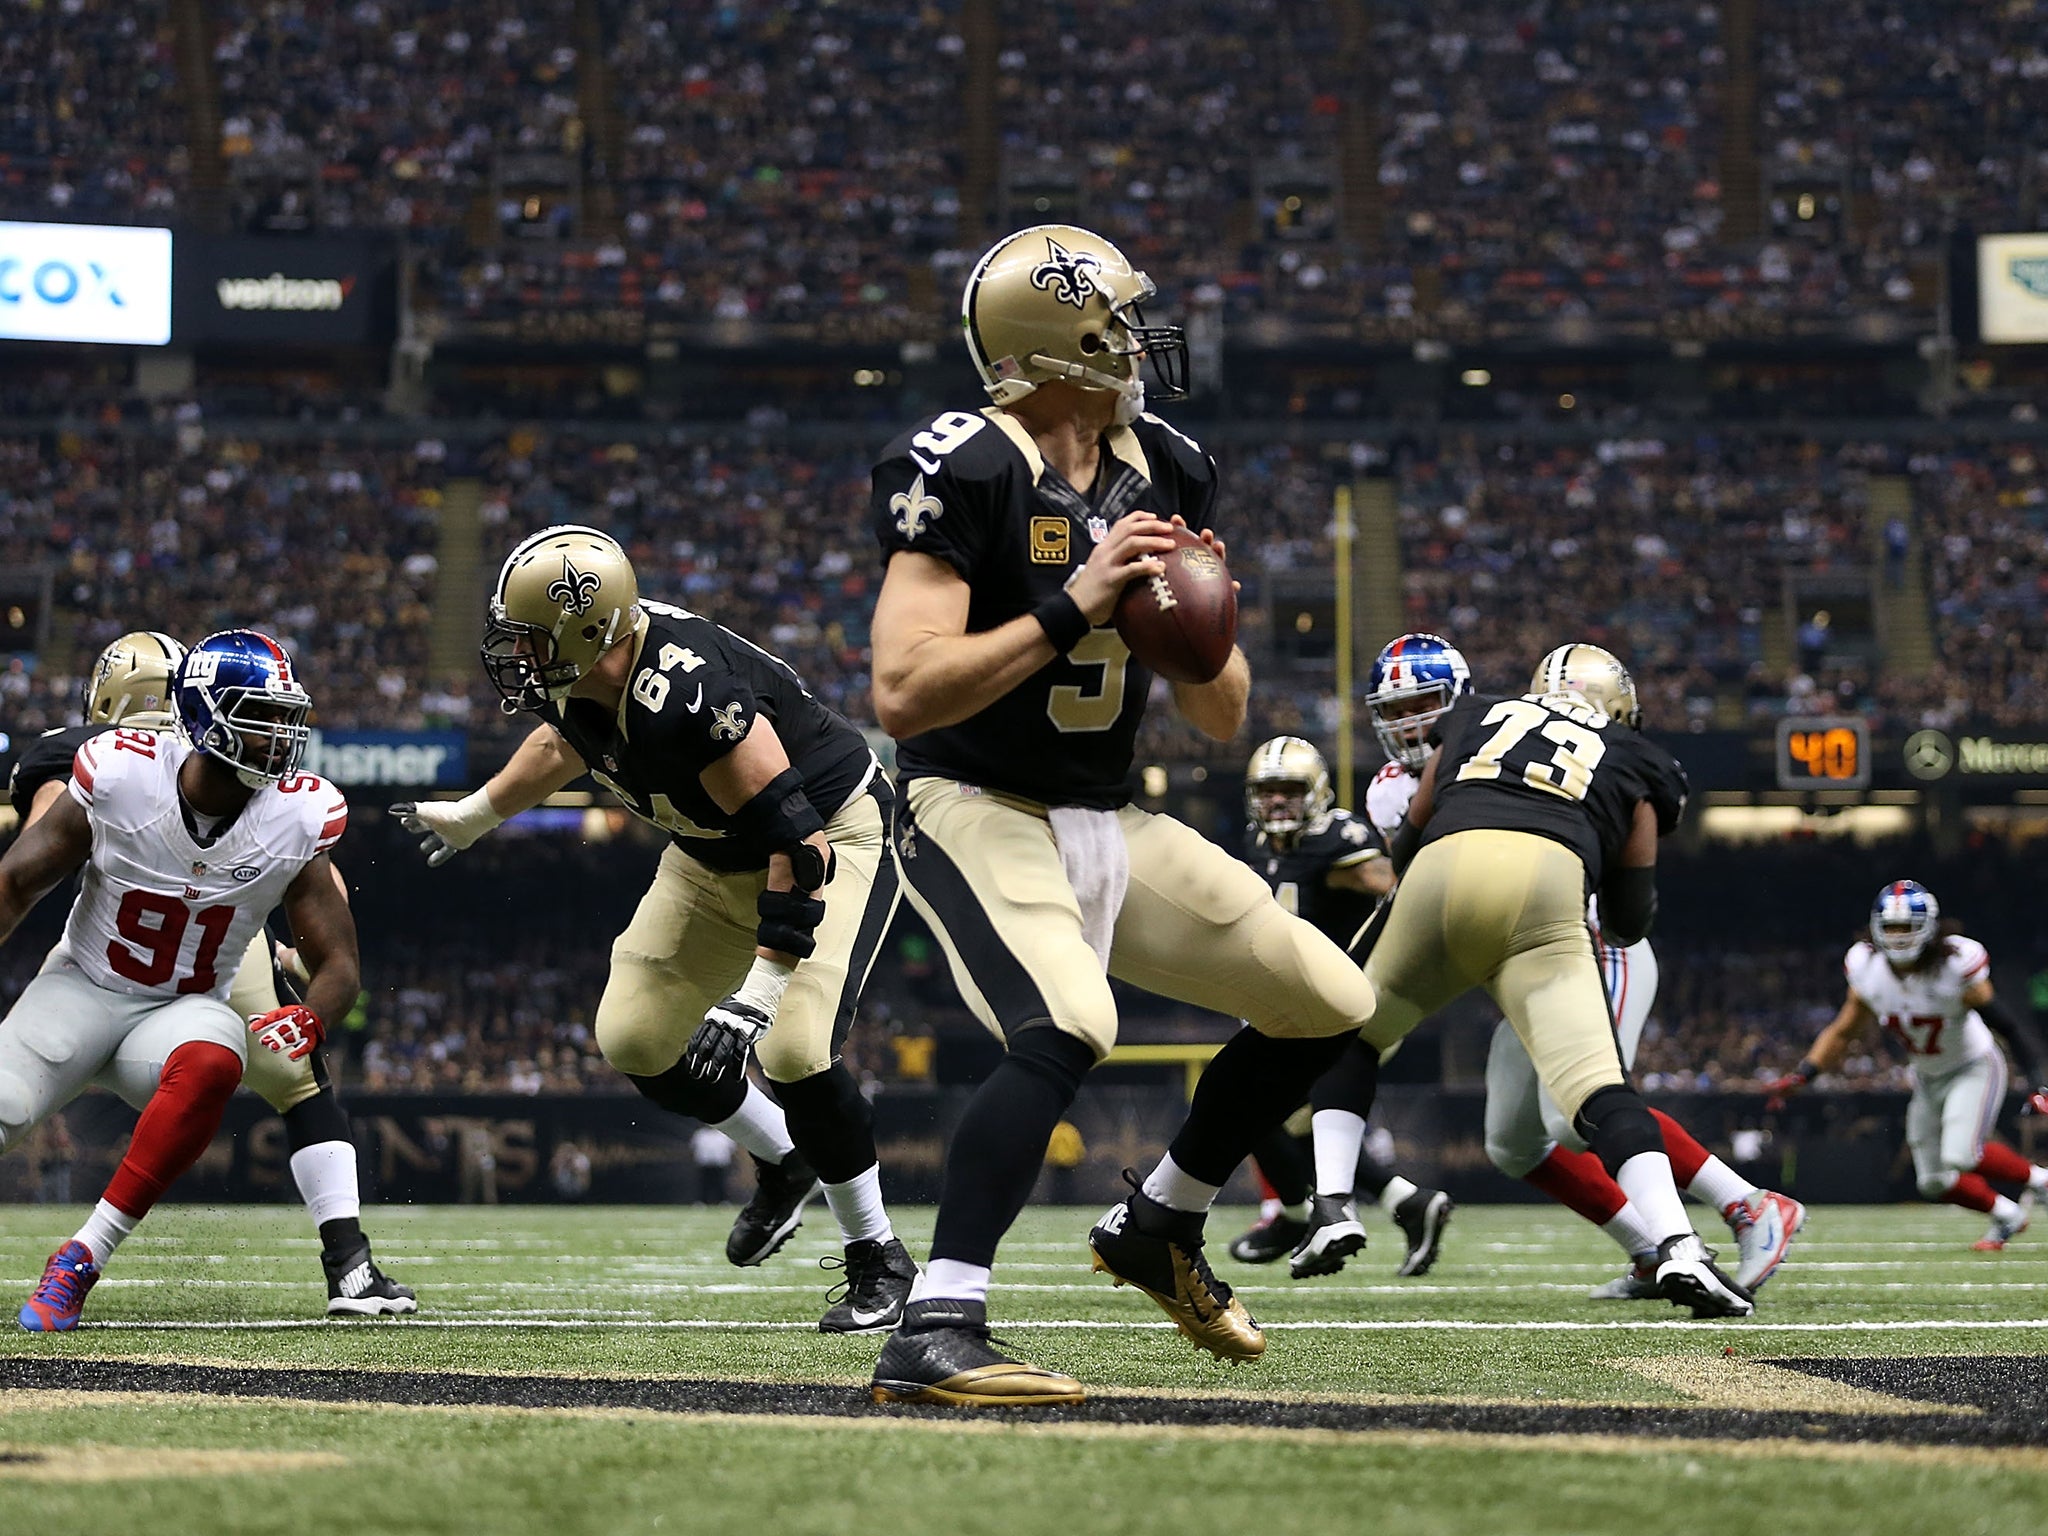 Brees continues to play at a high level despite his age